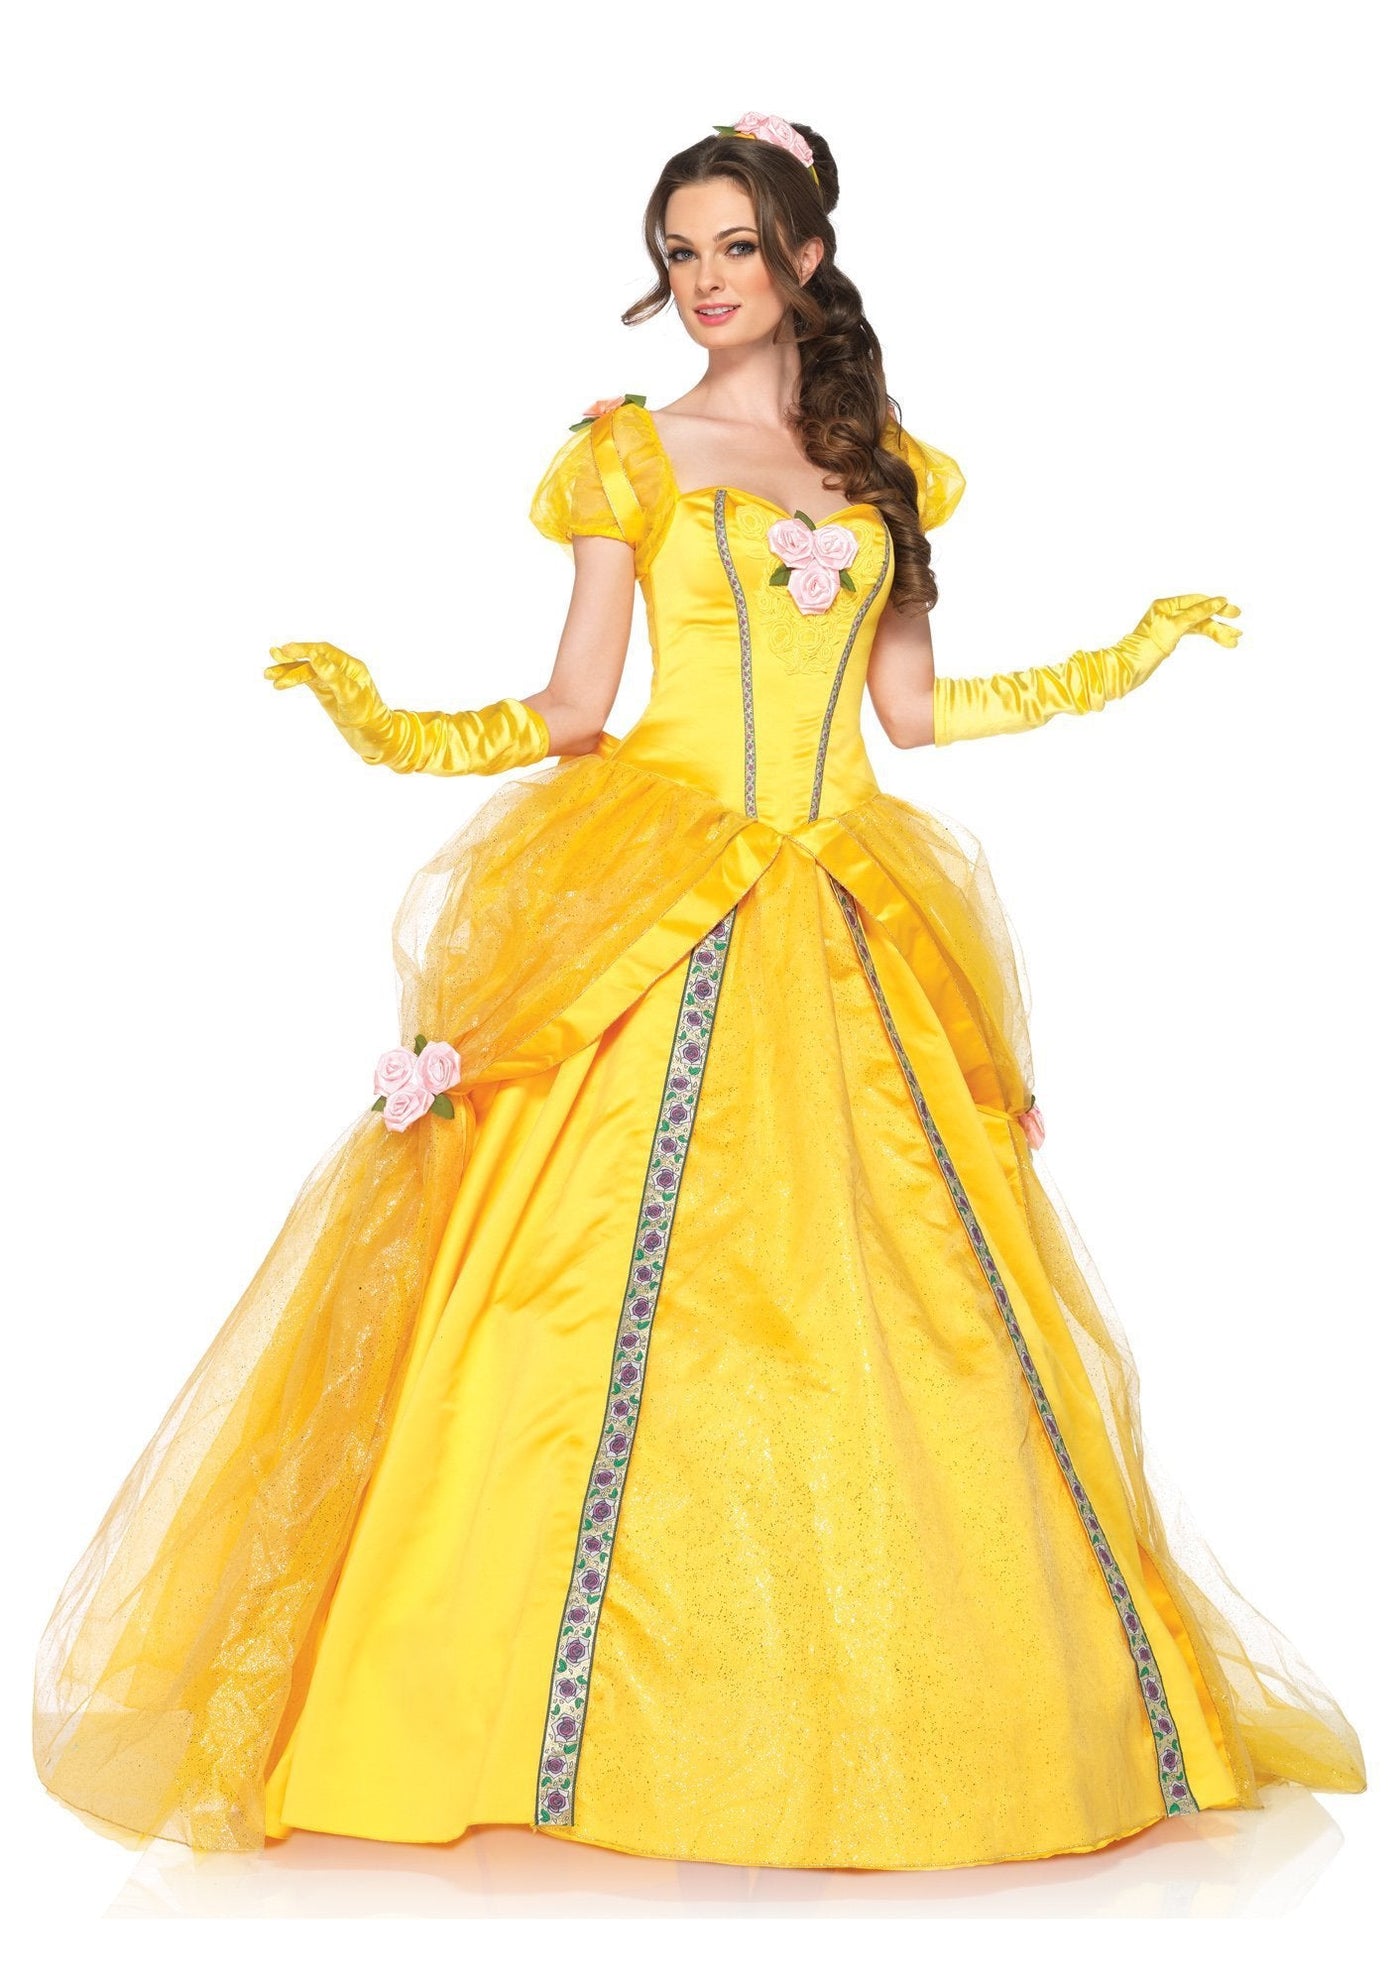 Deluxe Belle Costume - Beauty & the Beast - JJ's Party House